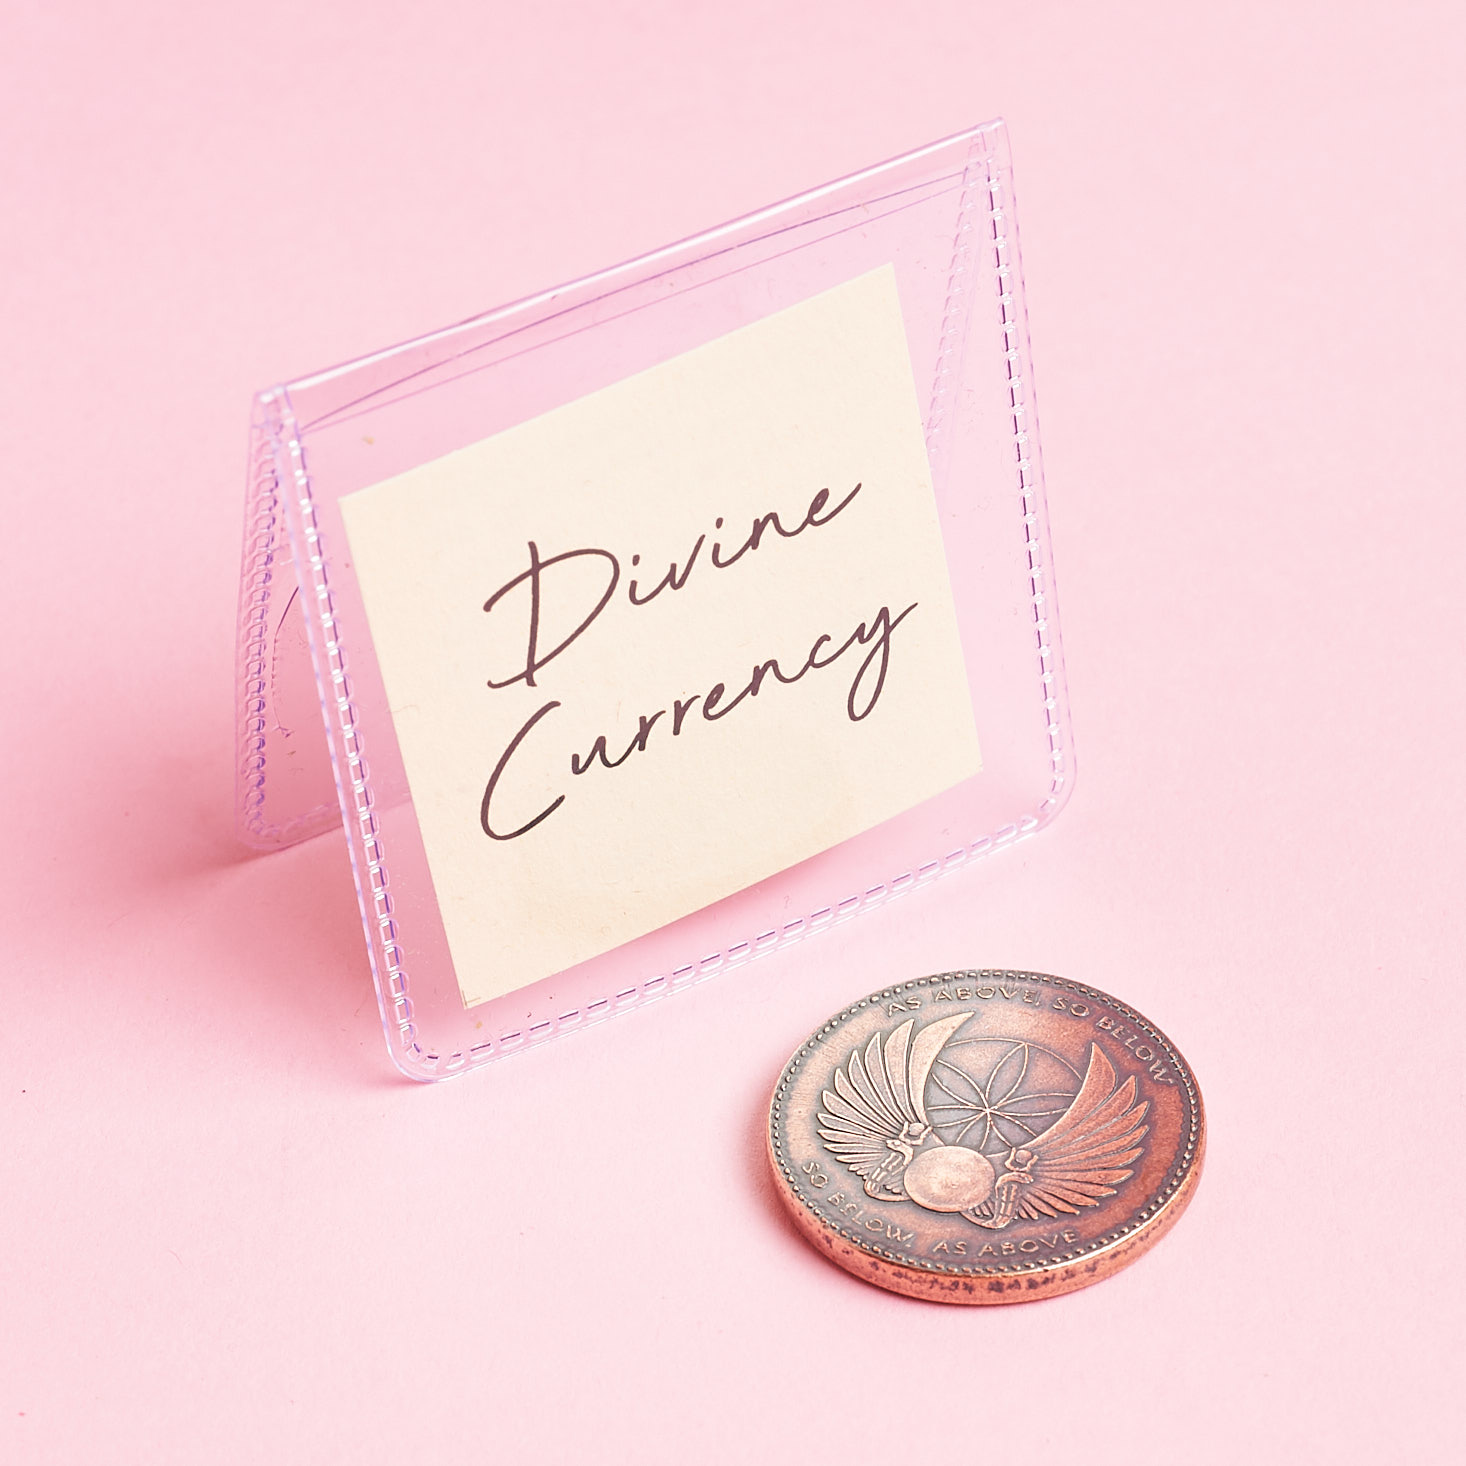 Goddess Provisions Divine Feminine May 2019 subscription box review coin in case